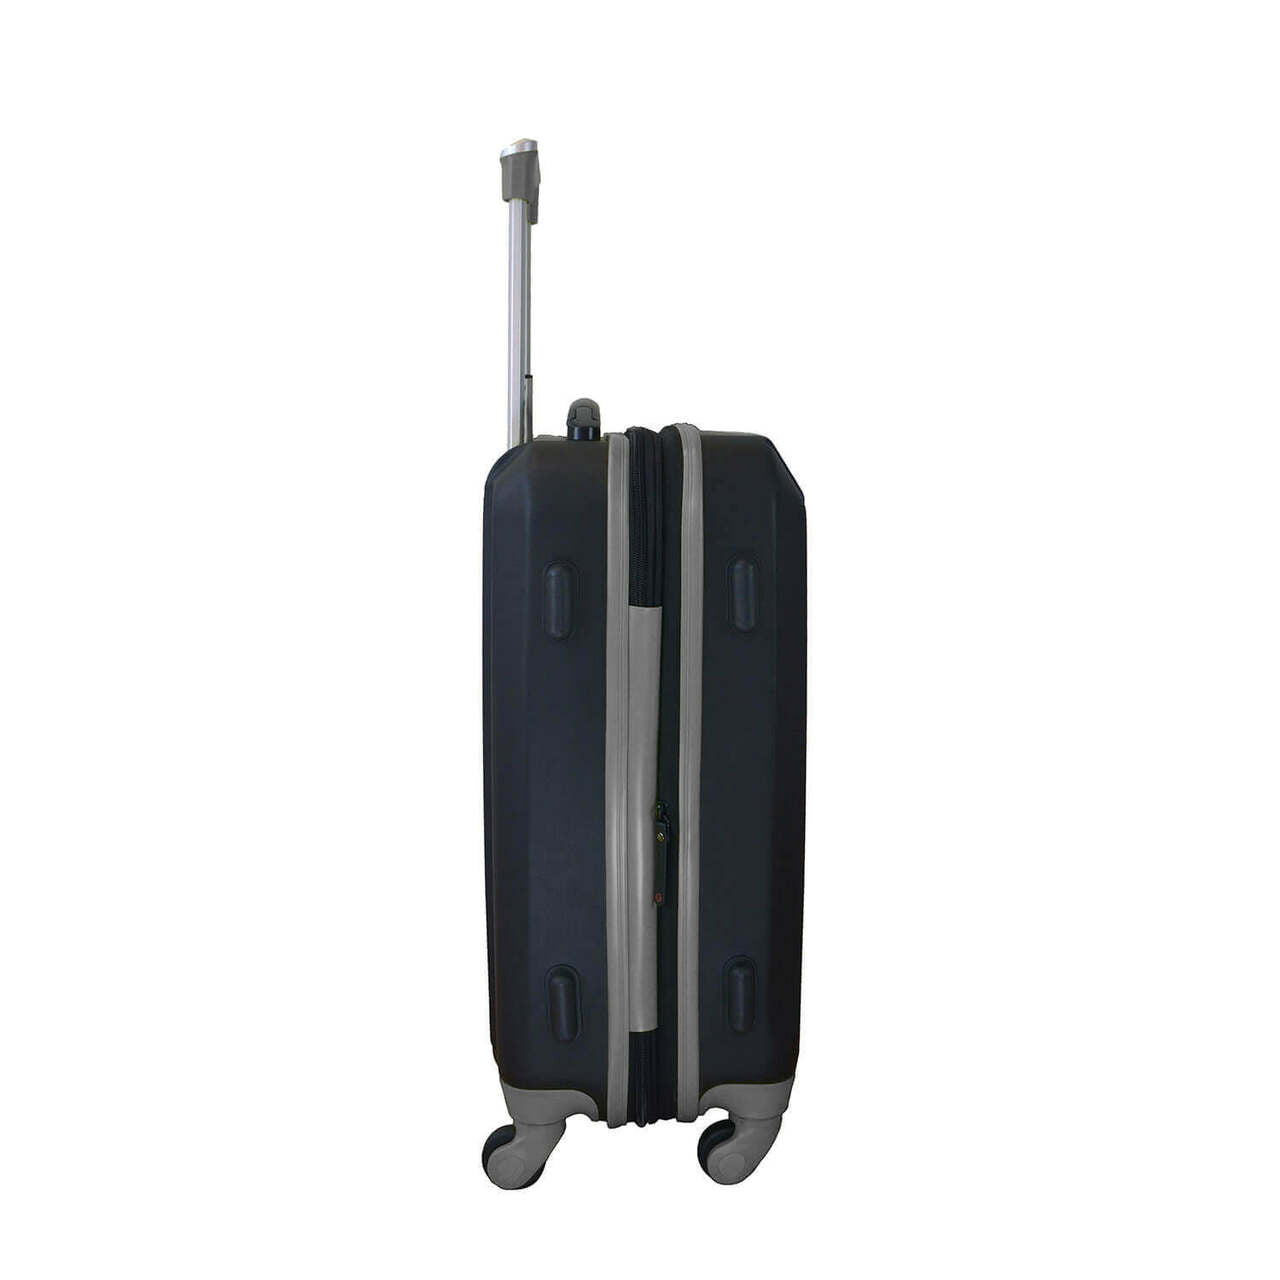 Michigan State Carry On Spinner Luggage | Michigan State Hardcase Two-Tone Luggage Carry-on Spinner in Black